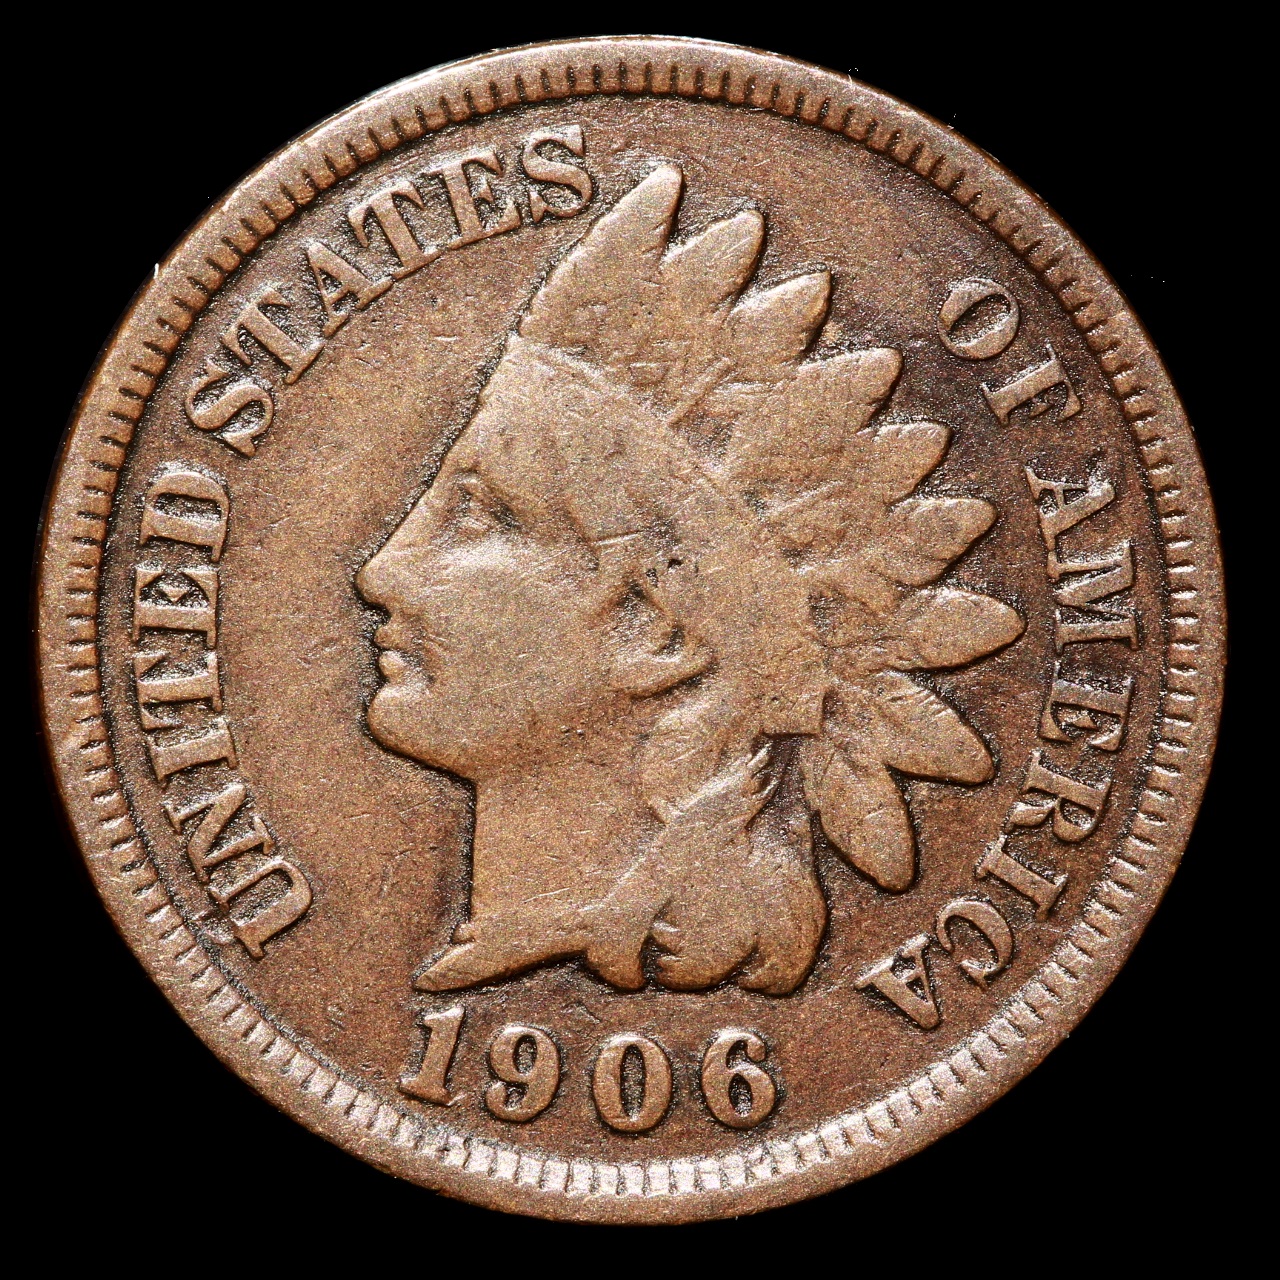 1906 Indian Cent, G-6